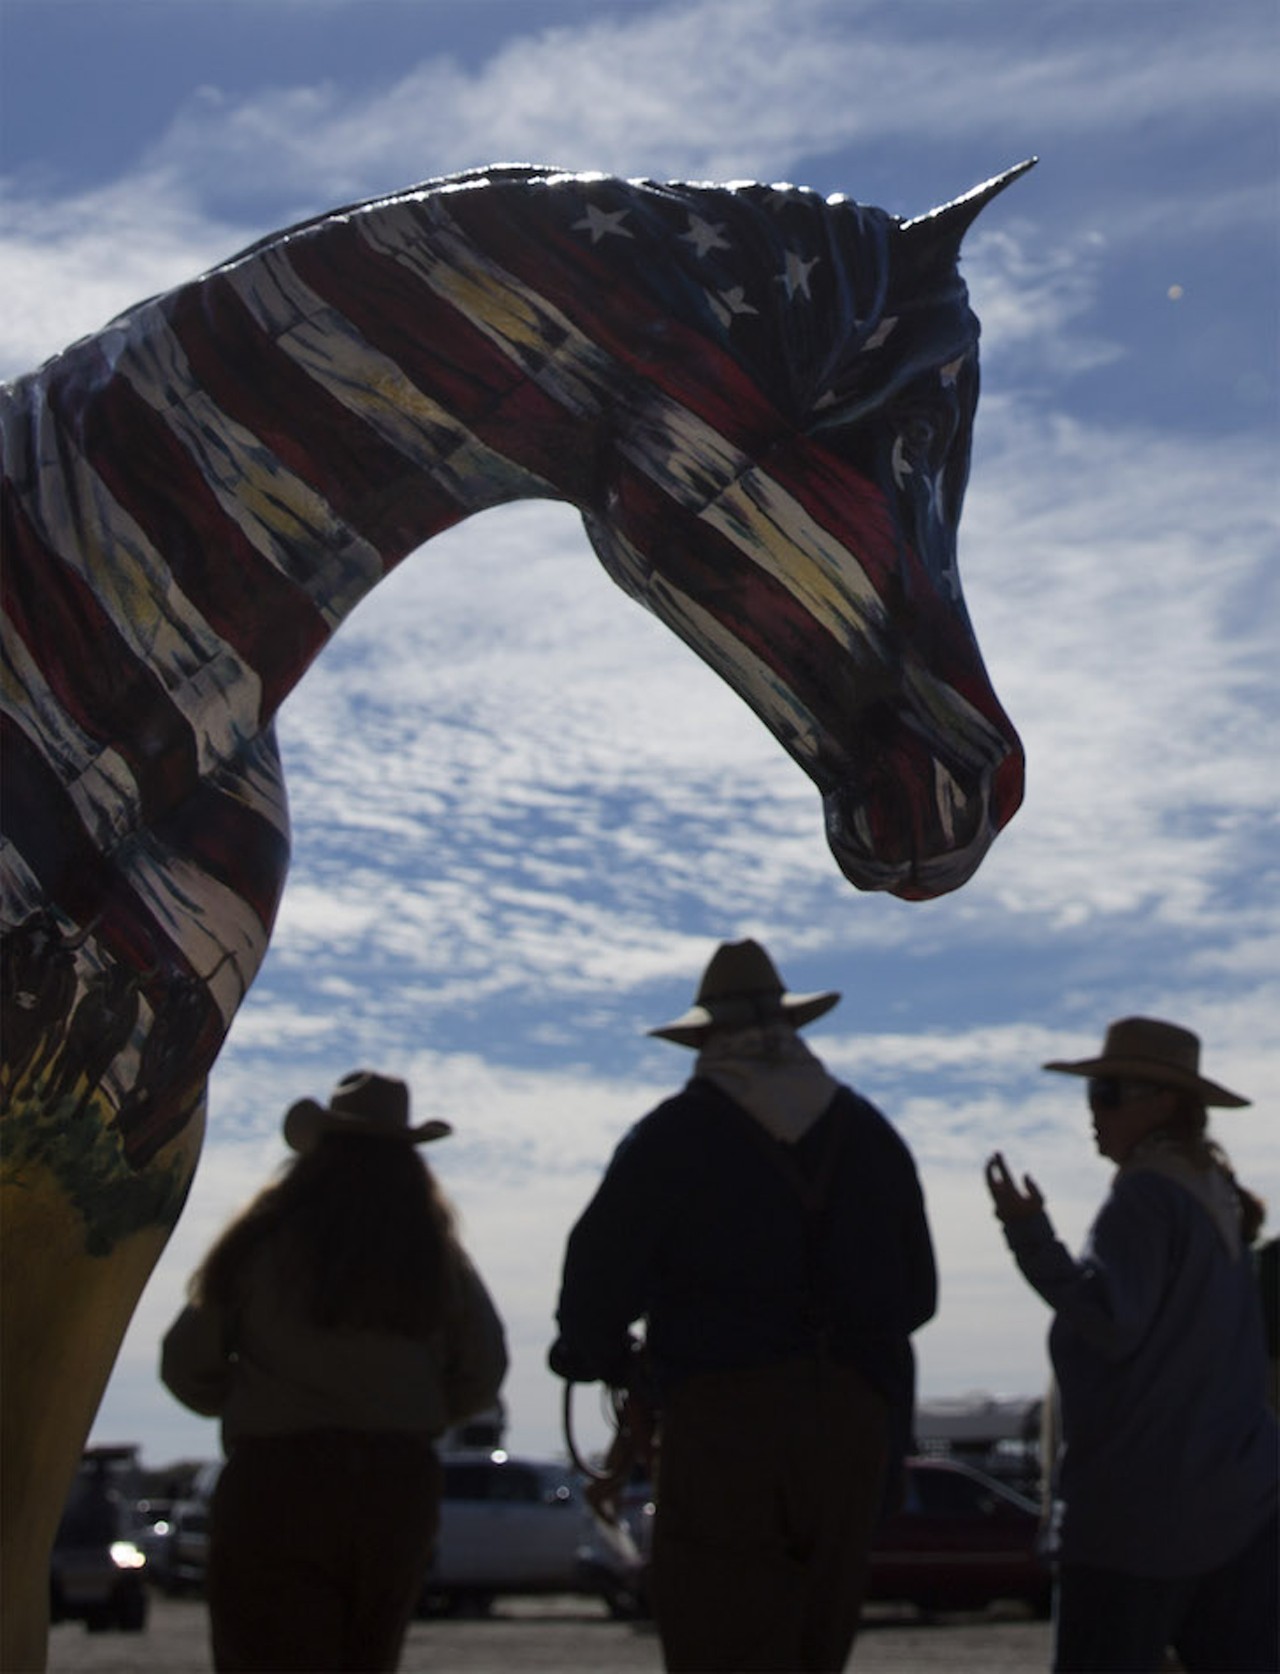 A hand-painted horse, created by Linda Ballantine Brown, with the history of Florida and the Great Florida Cattle Drive painted on it sits just outside the Silver Spurs Arena in Kenansville. The painted horse was given away in a raffle with a host of other items related to the cattle drive.